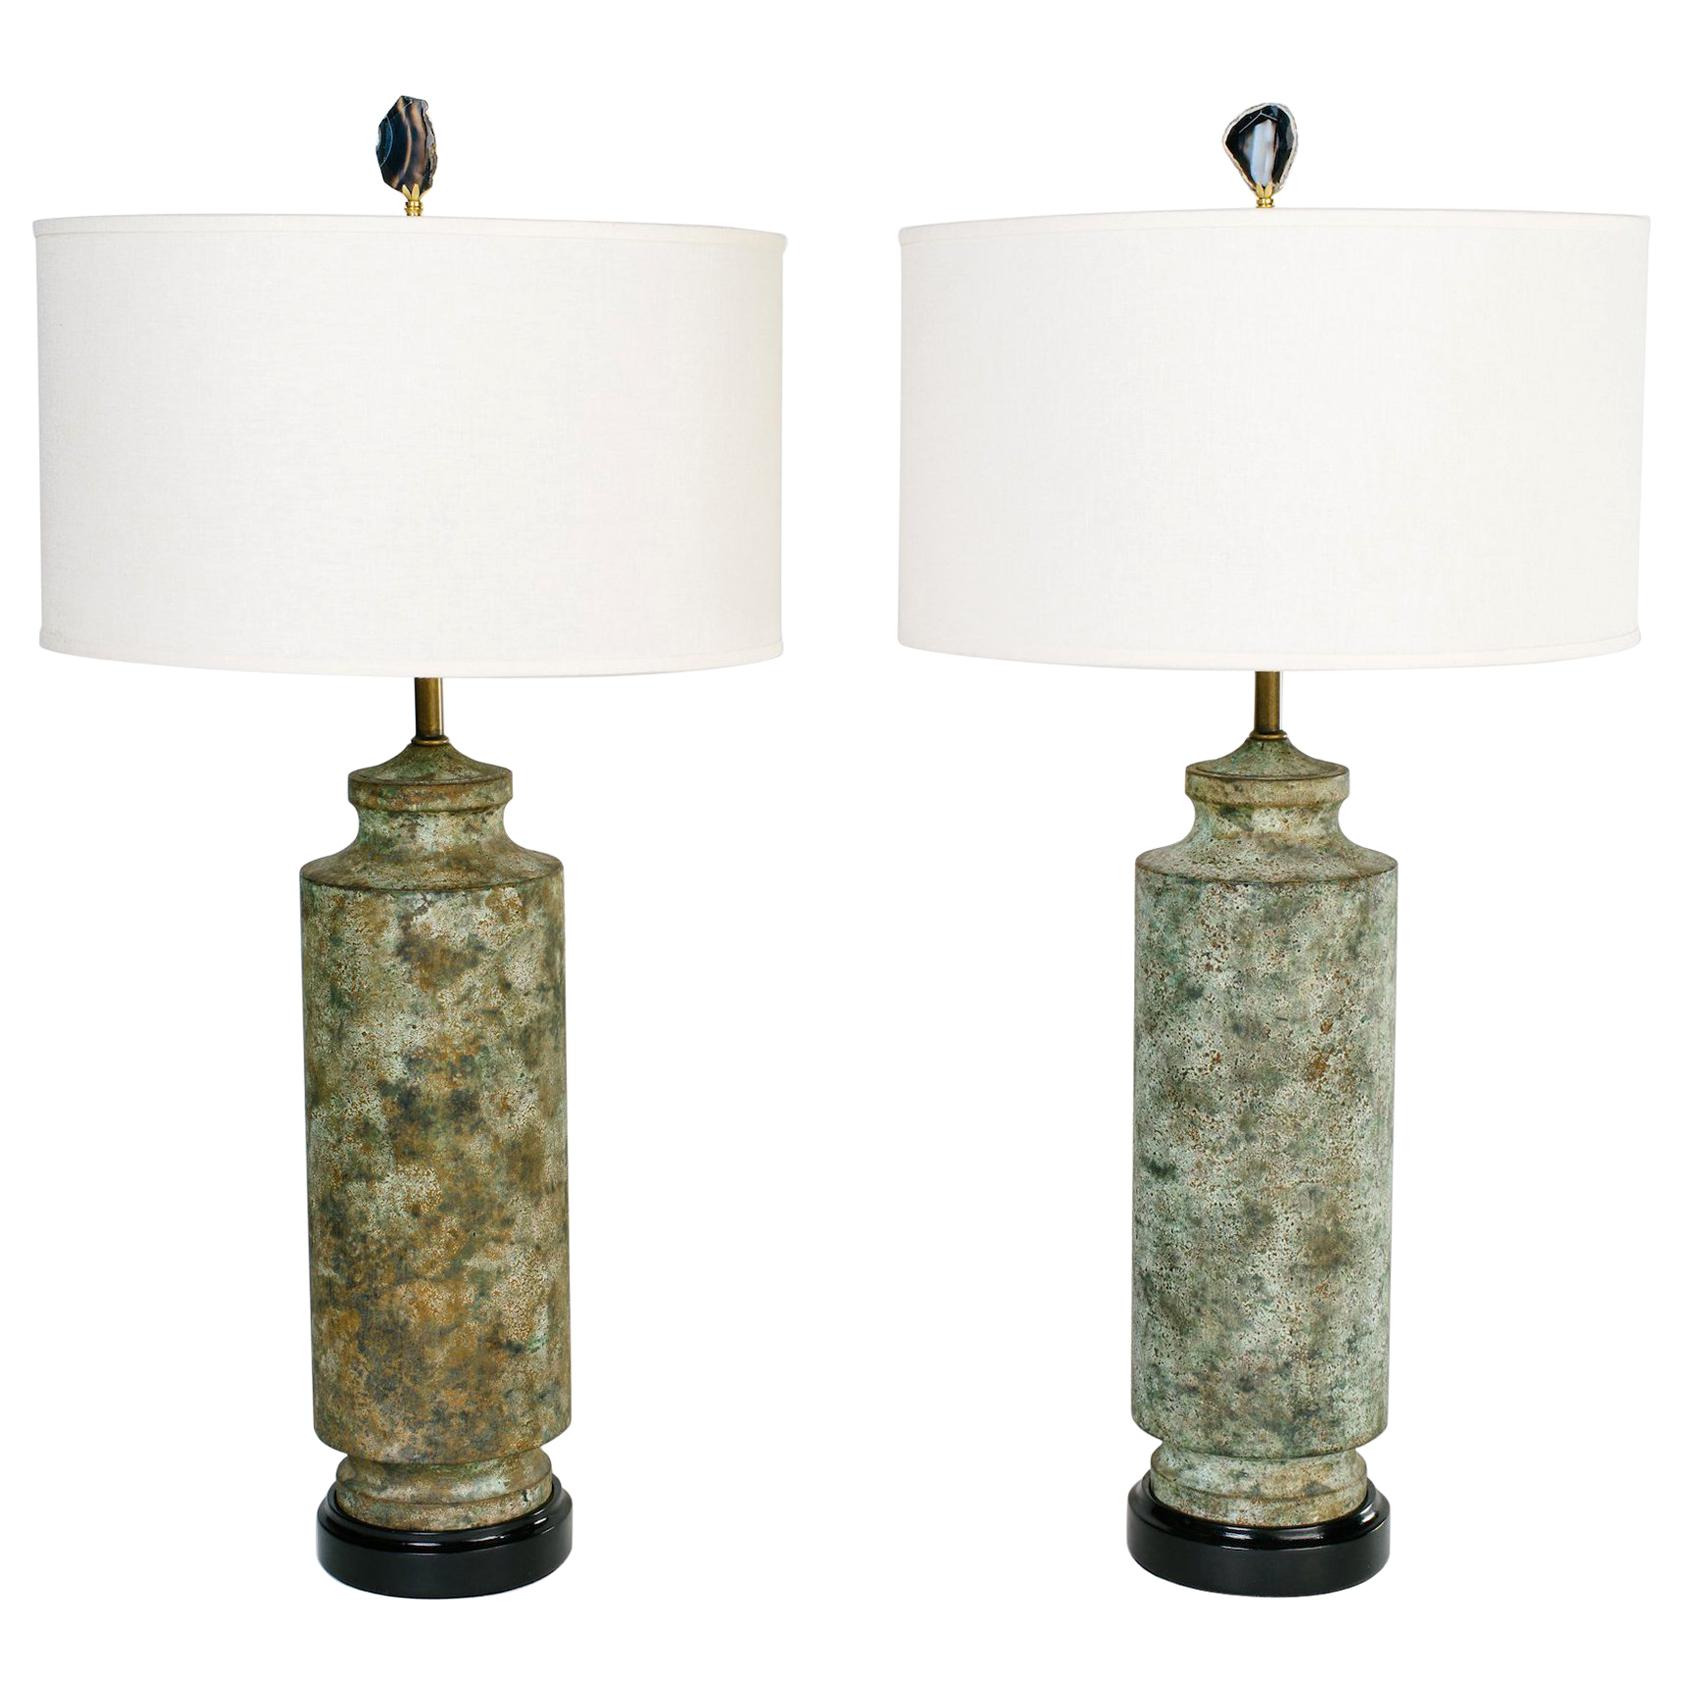 Pair of Mid-Century Modern Brutalist Lamps in Distressed Oxidized Metal